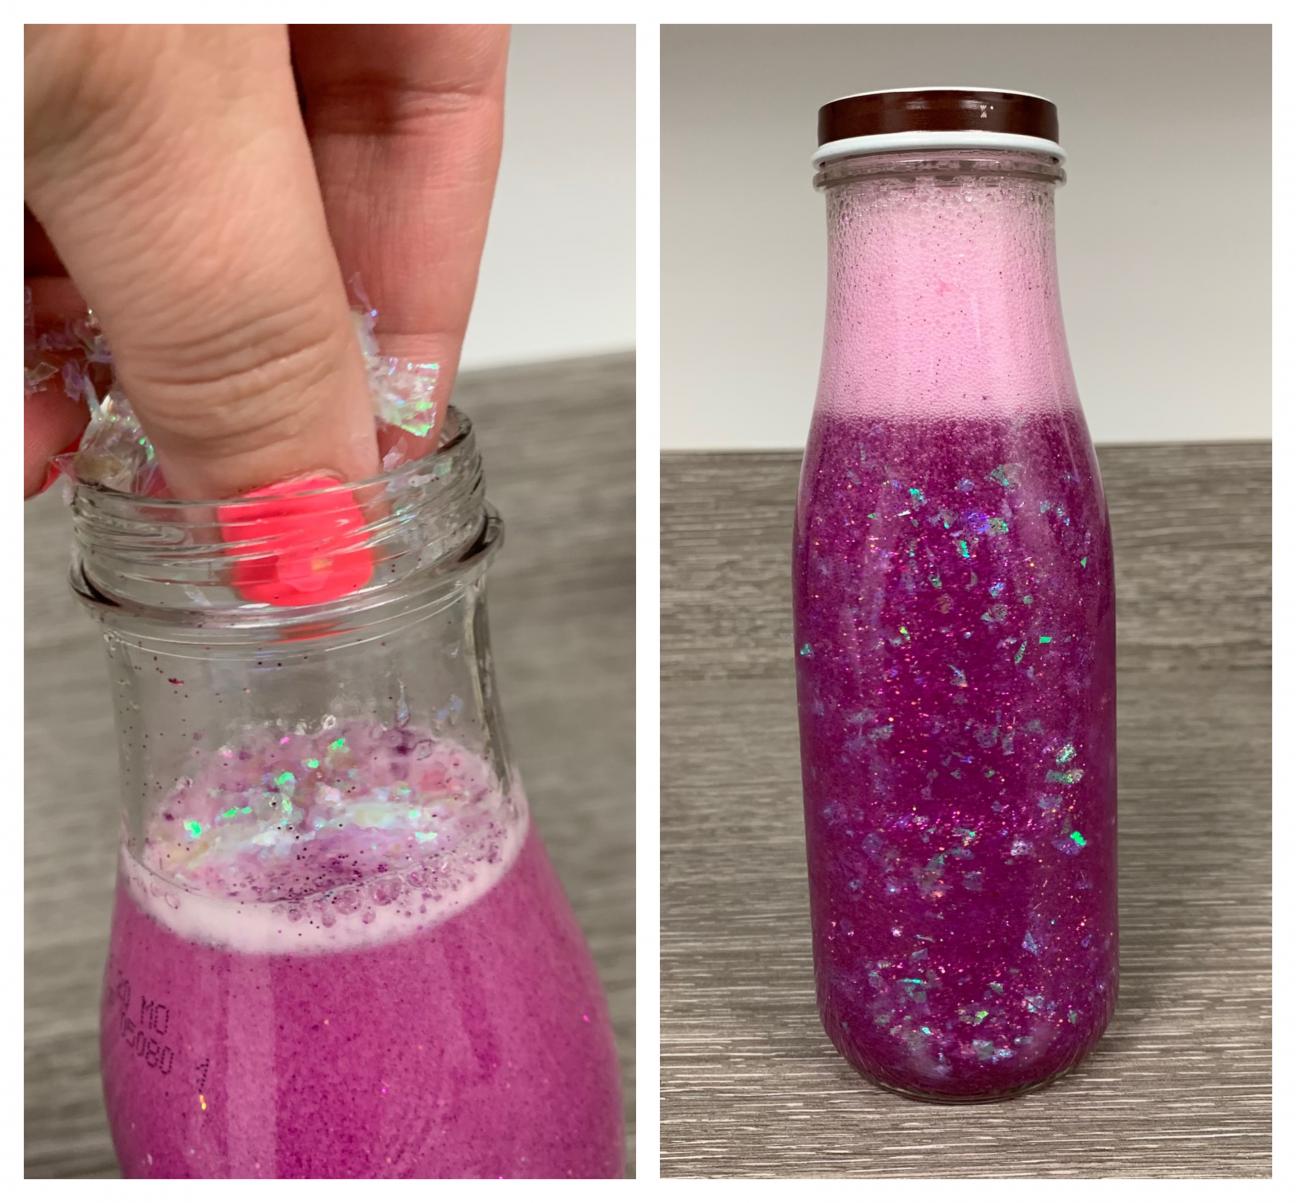 2 photos of calming glitter jars, one with large glitter being added and one with the glitter bottle shaken up with the glitter settling